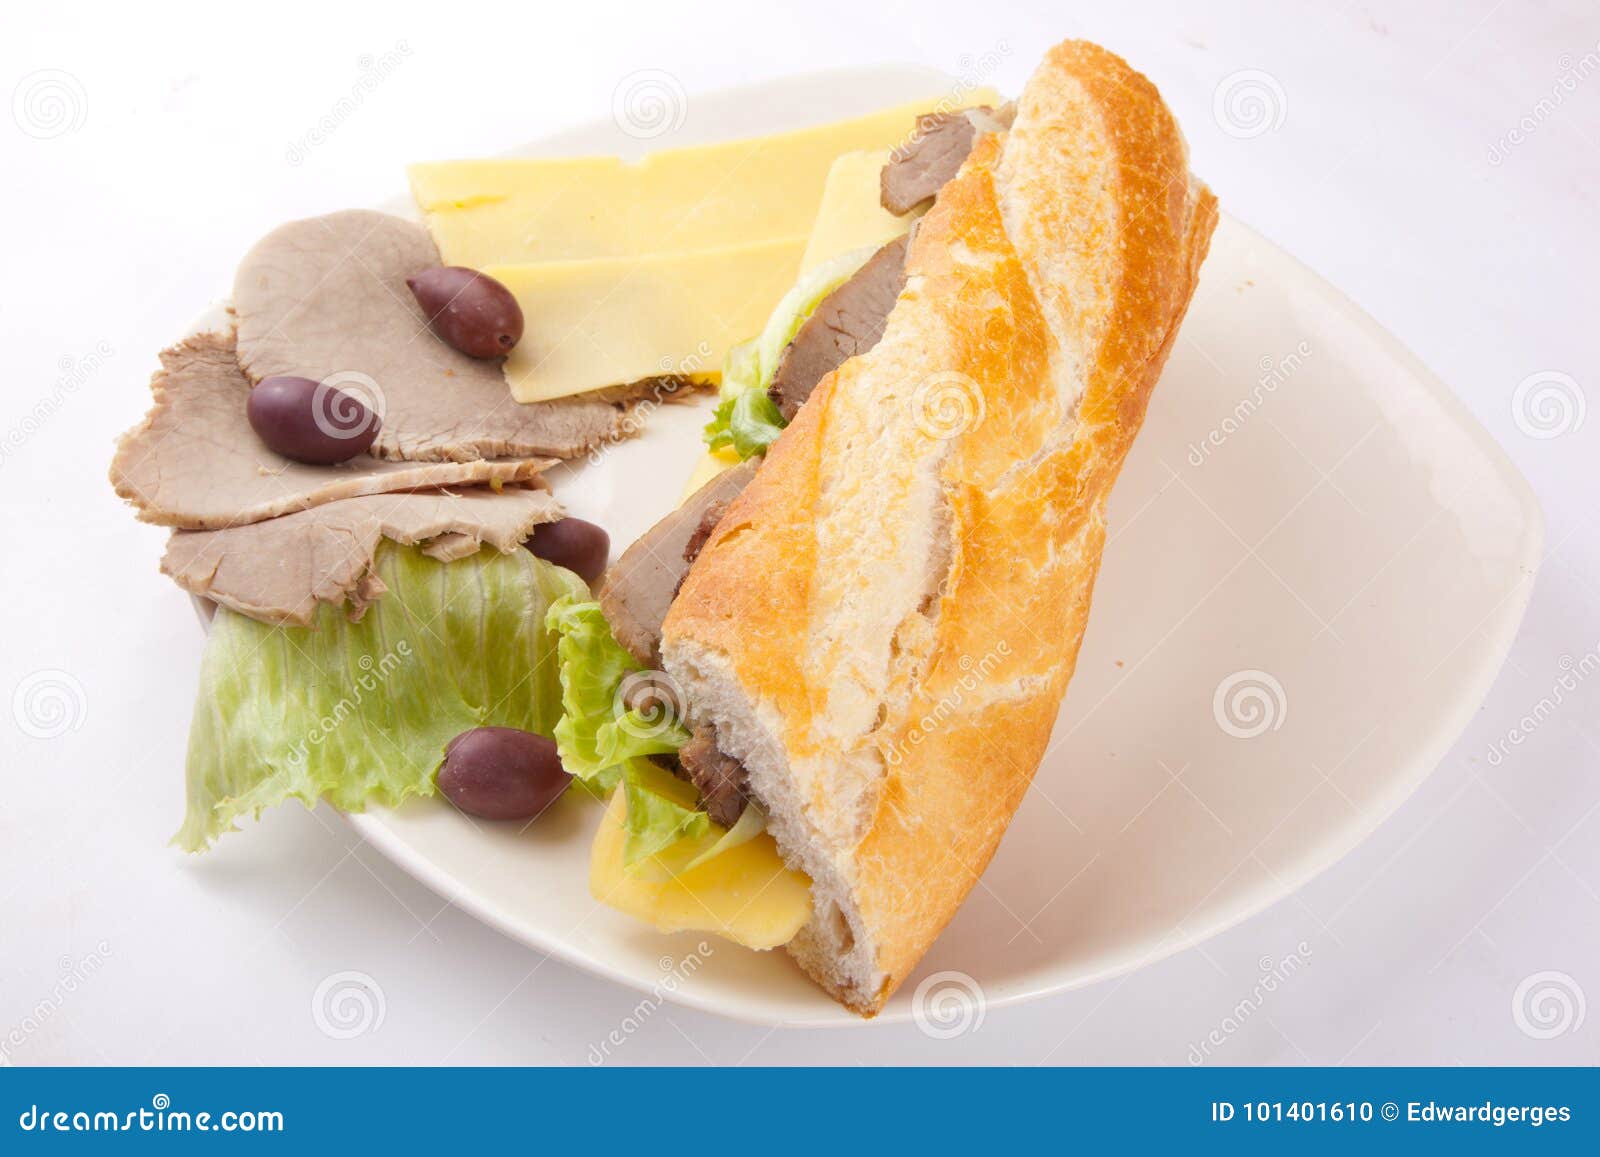 Cold meat Sandwich stock photo. Image of beef, brown - 101401610